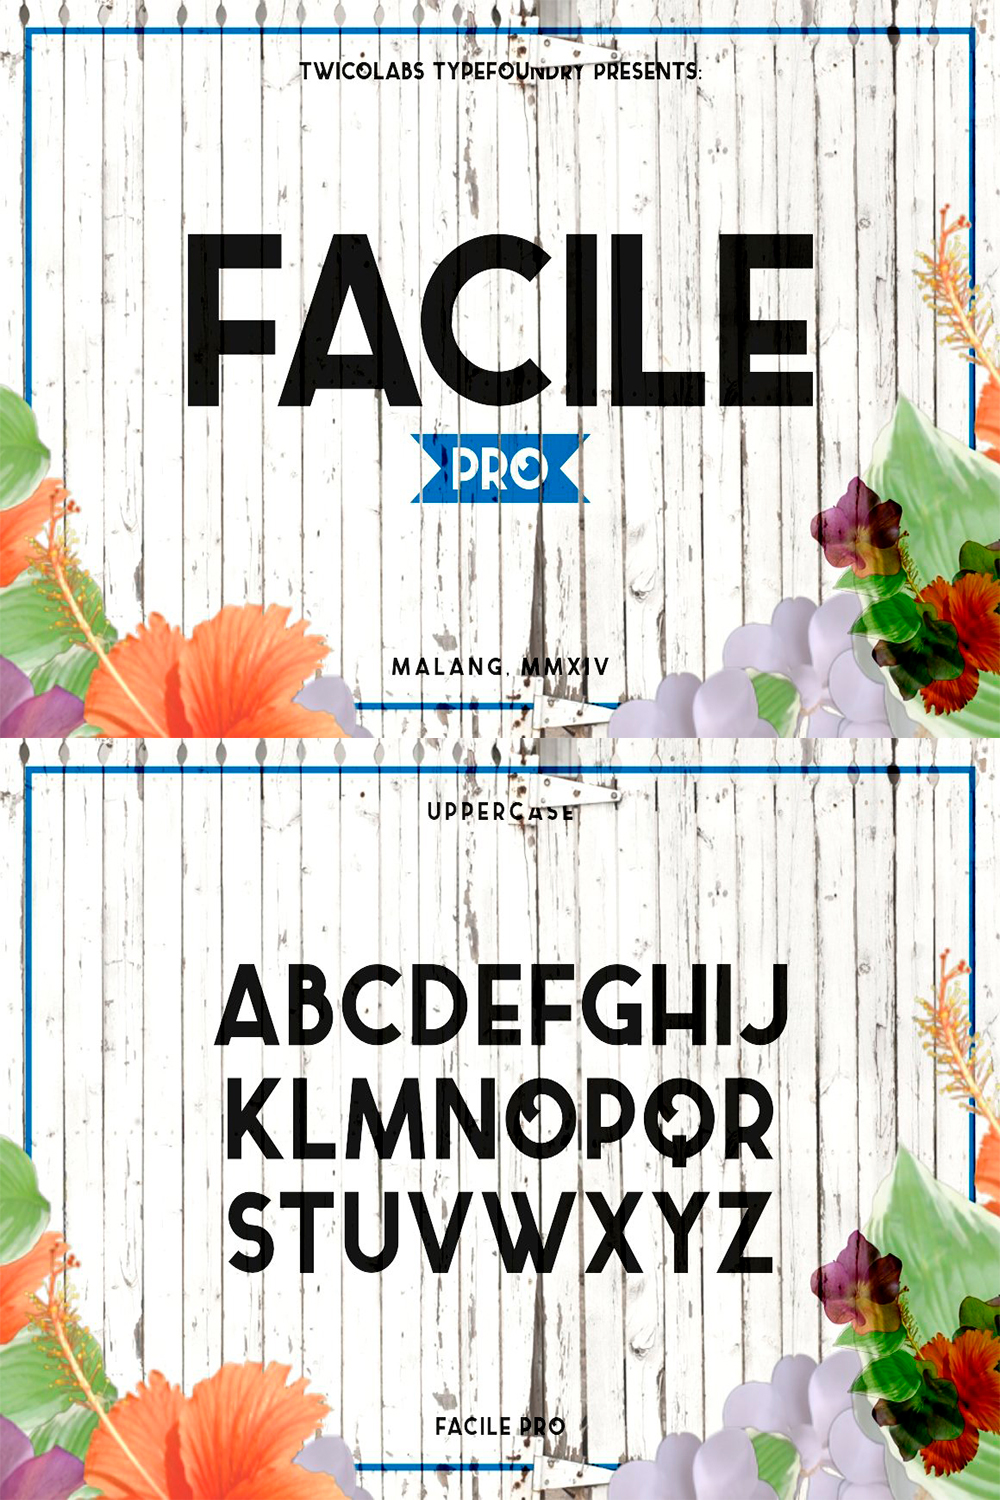 Images with text showing the elegant Facile Pro font.